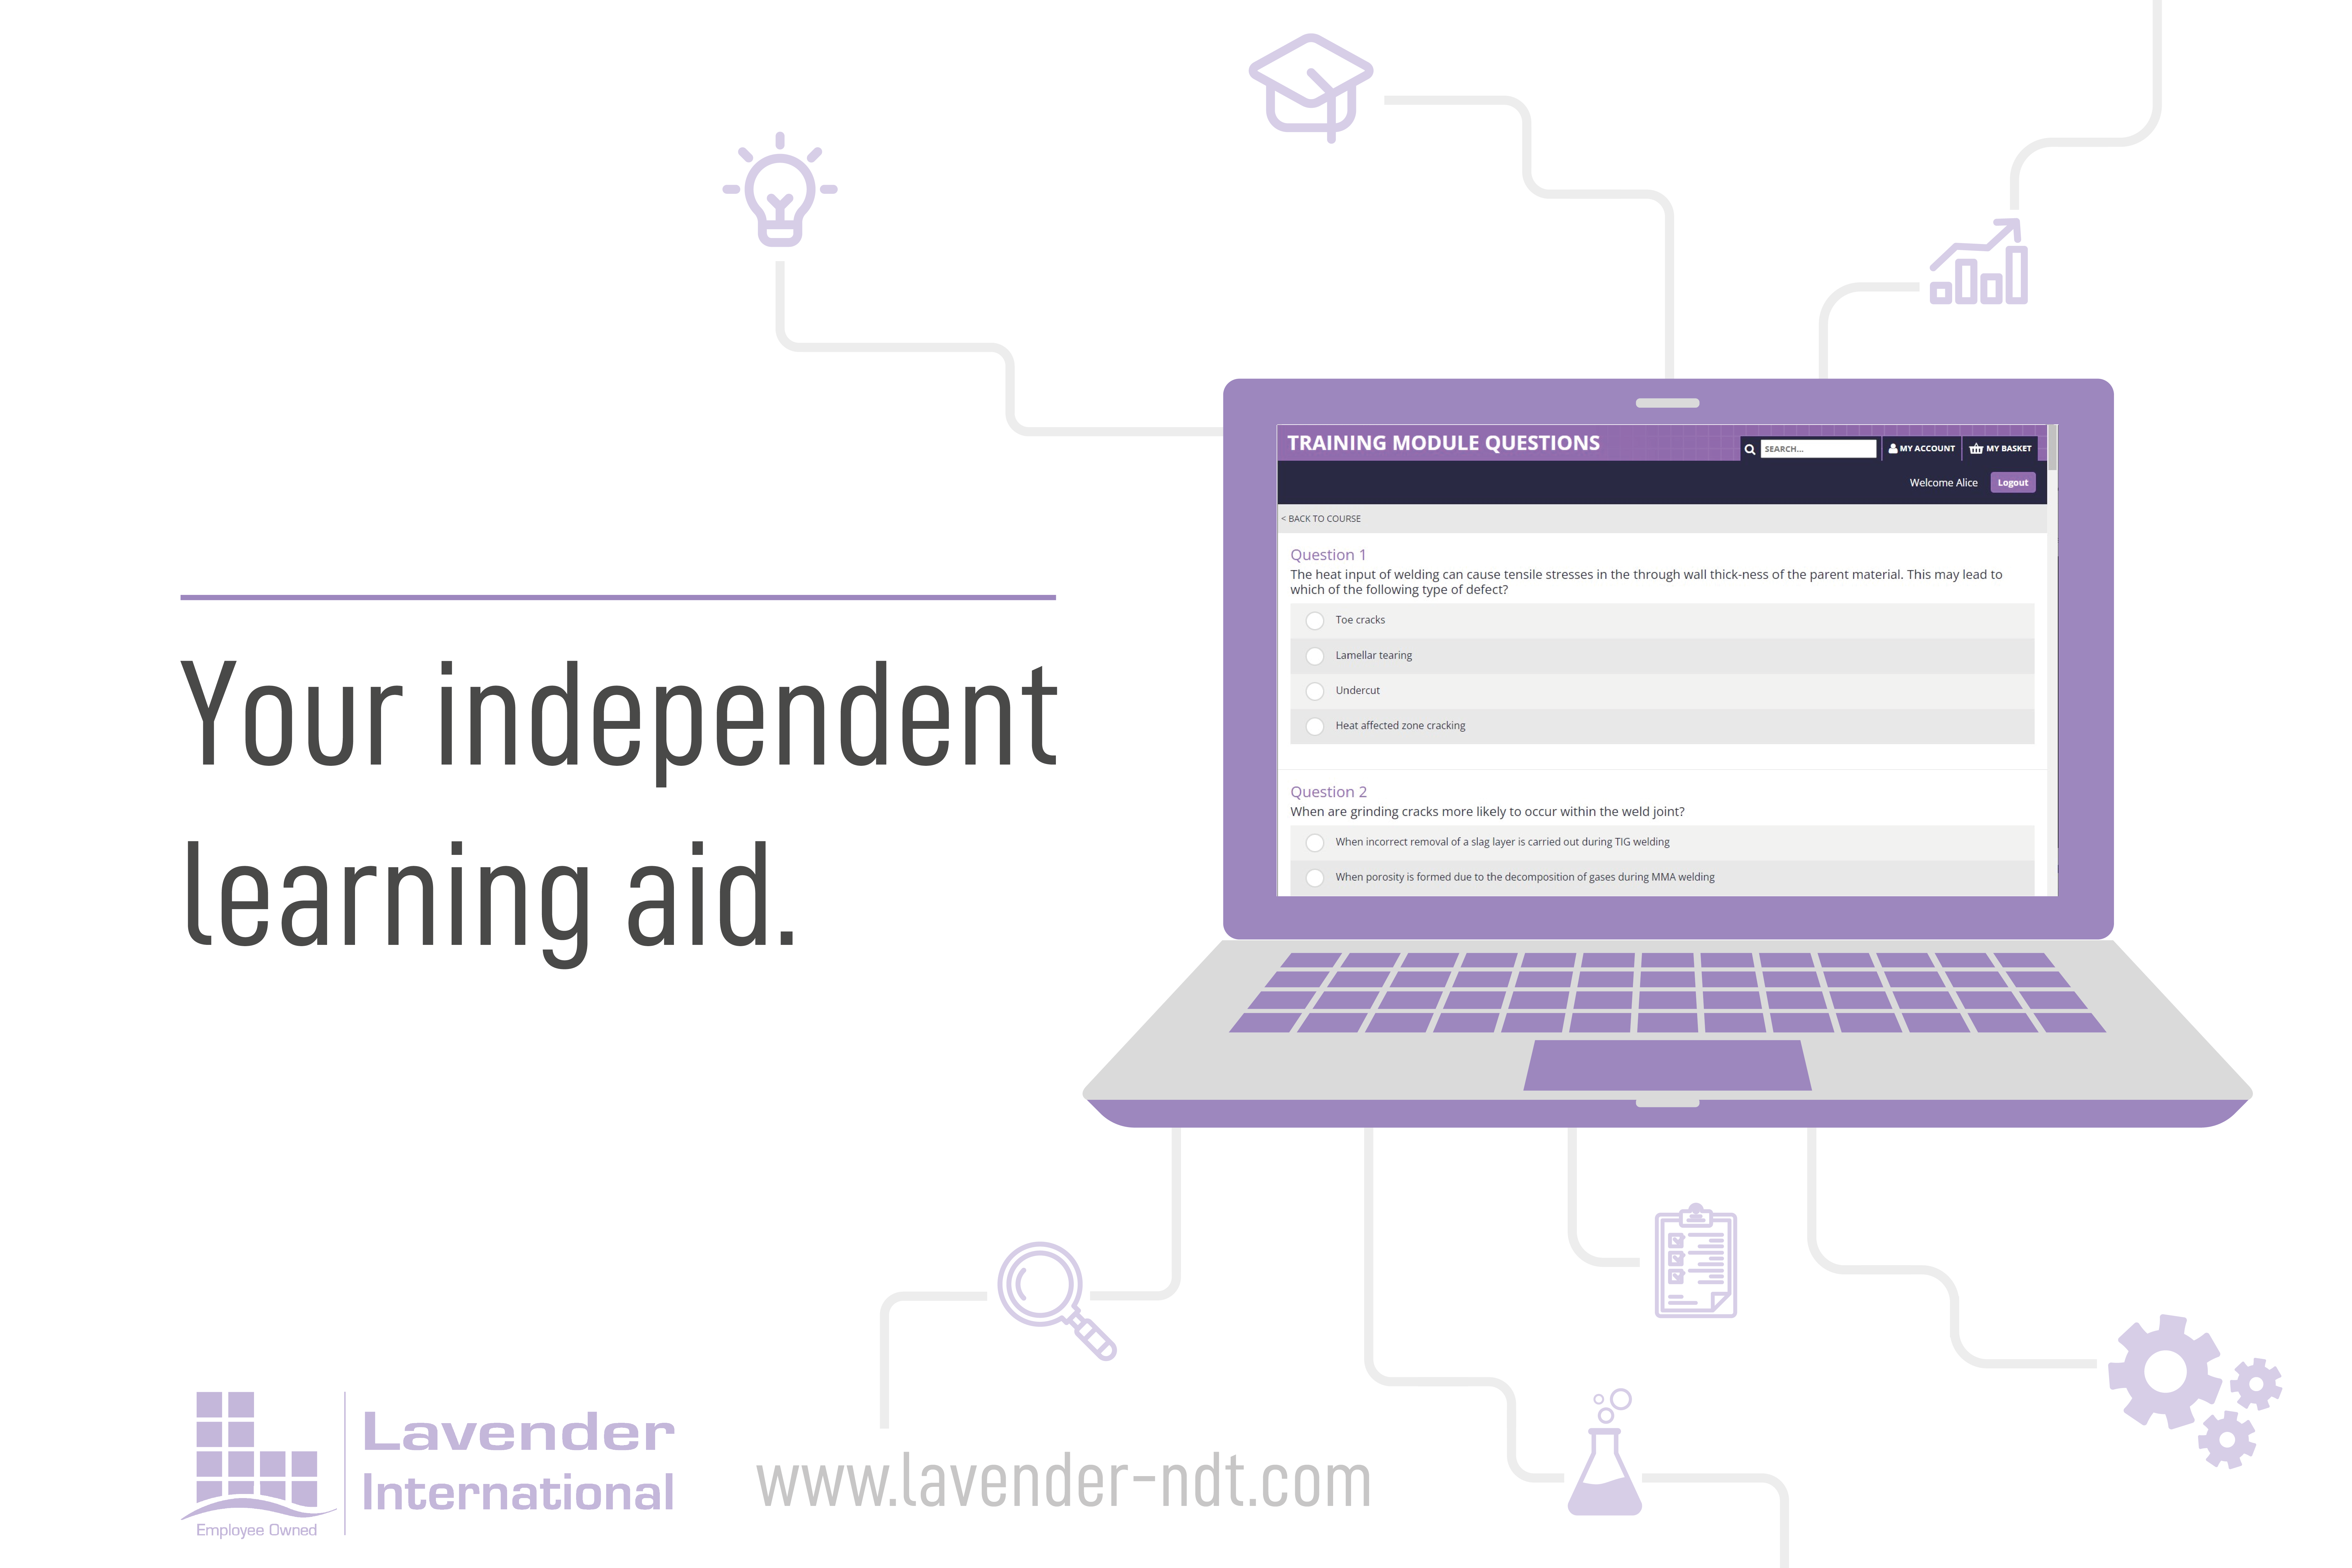 Your independent learning aid